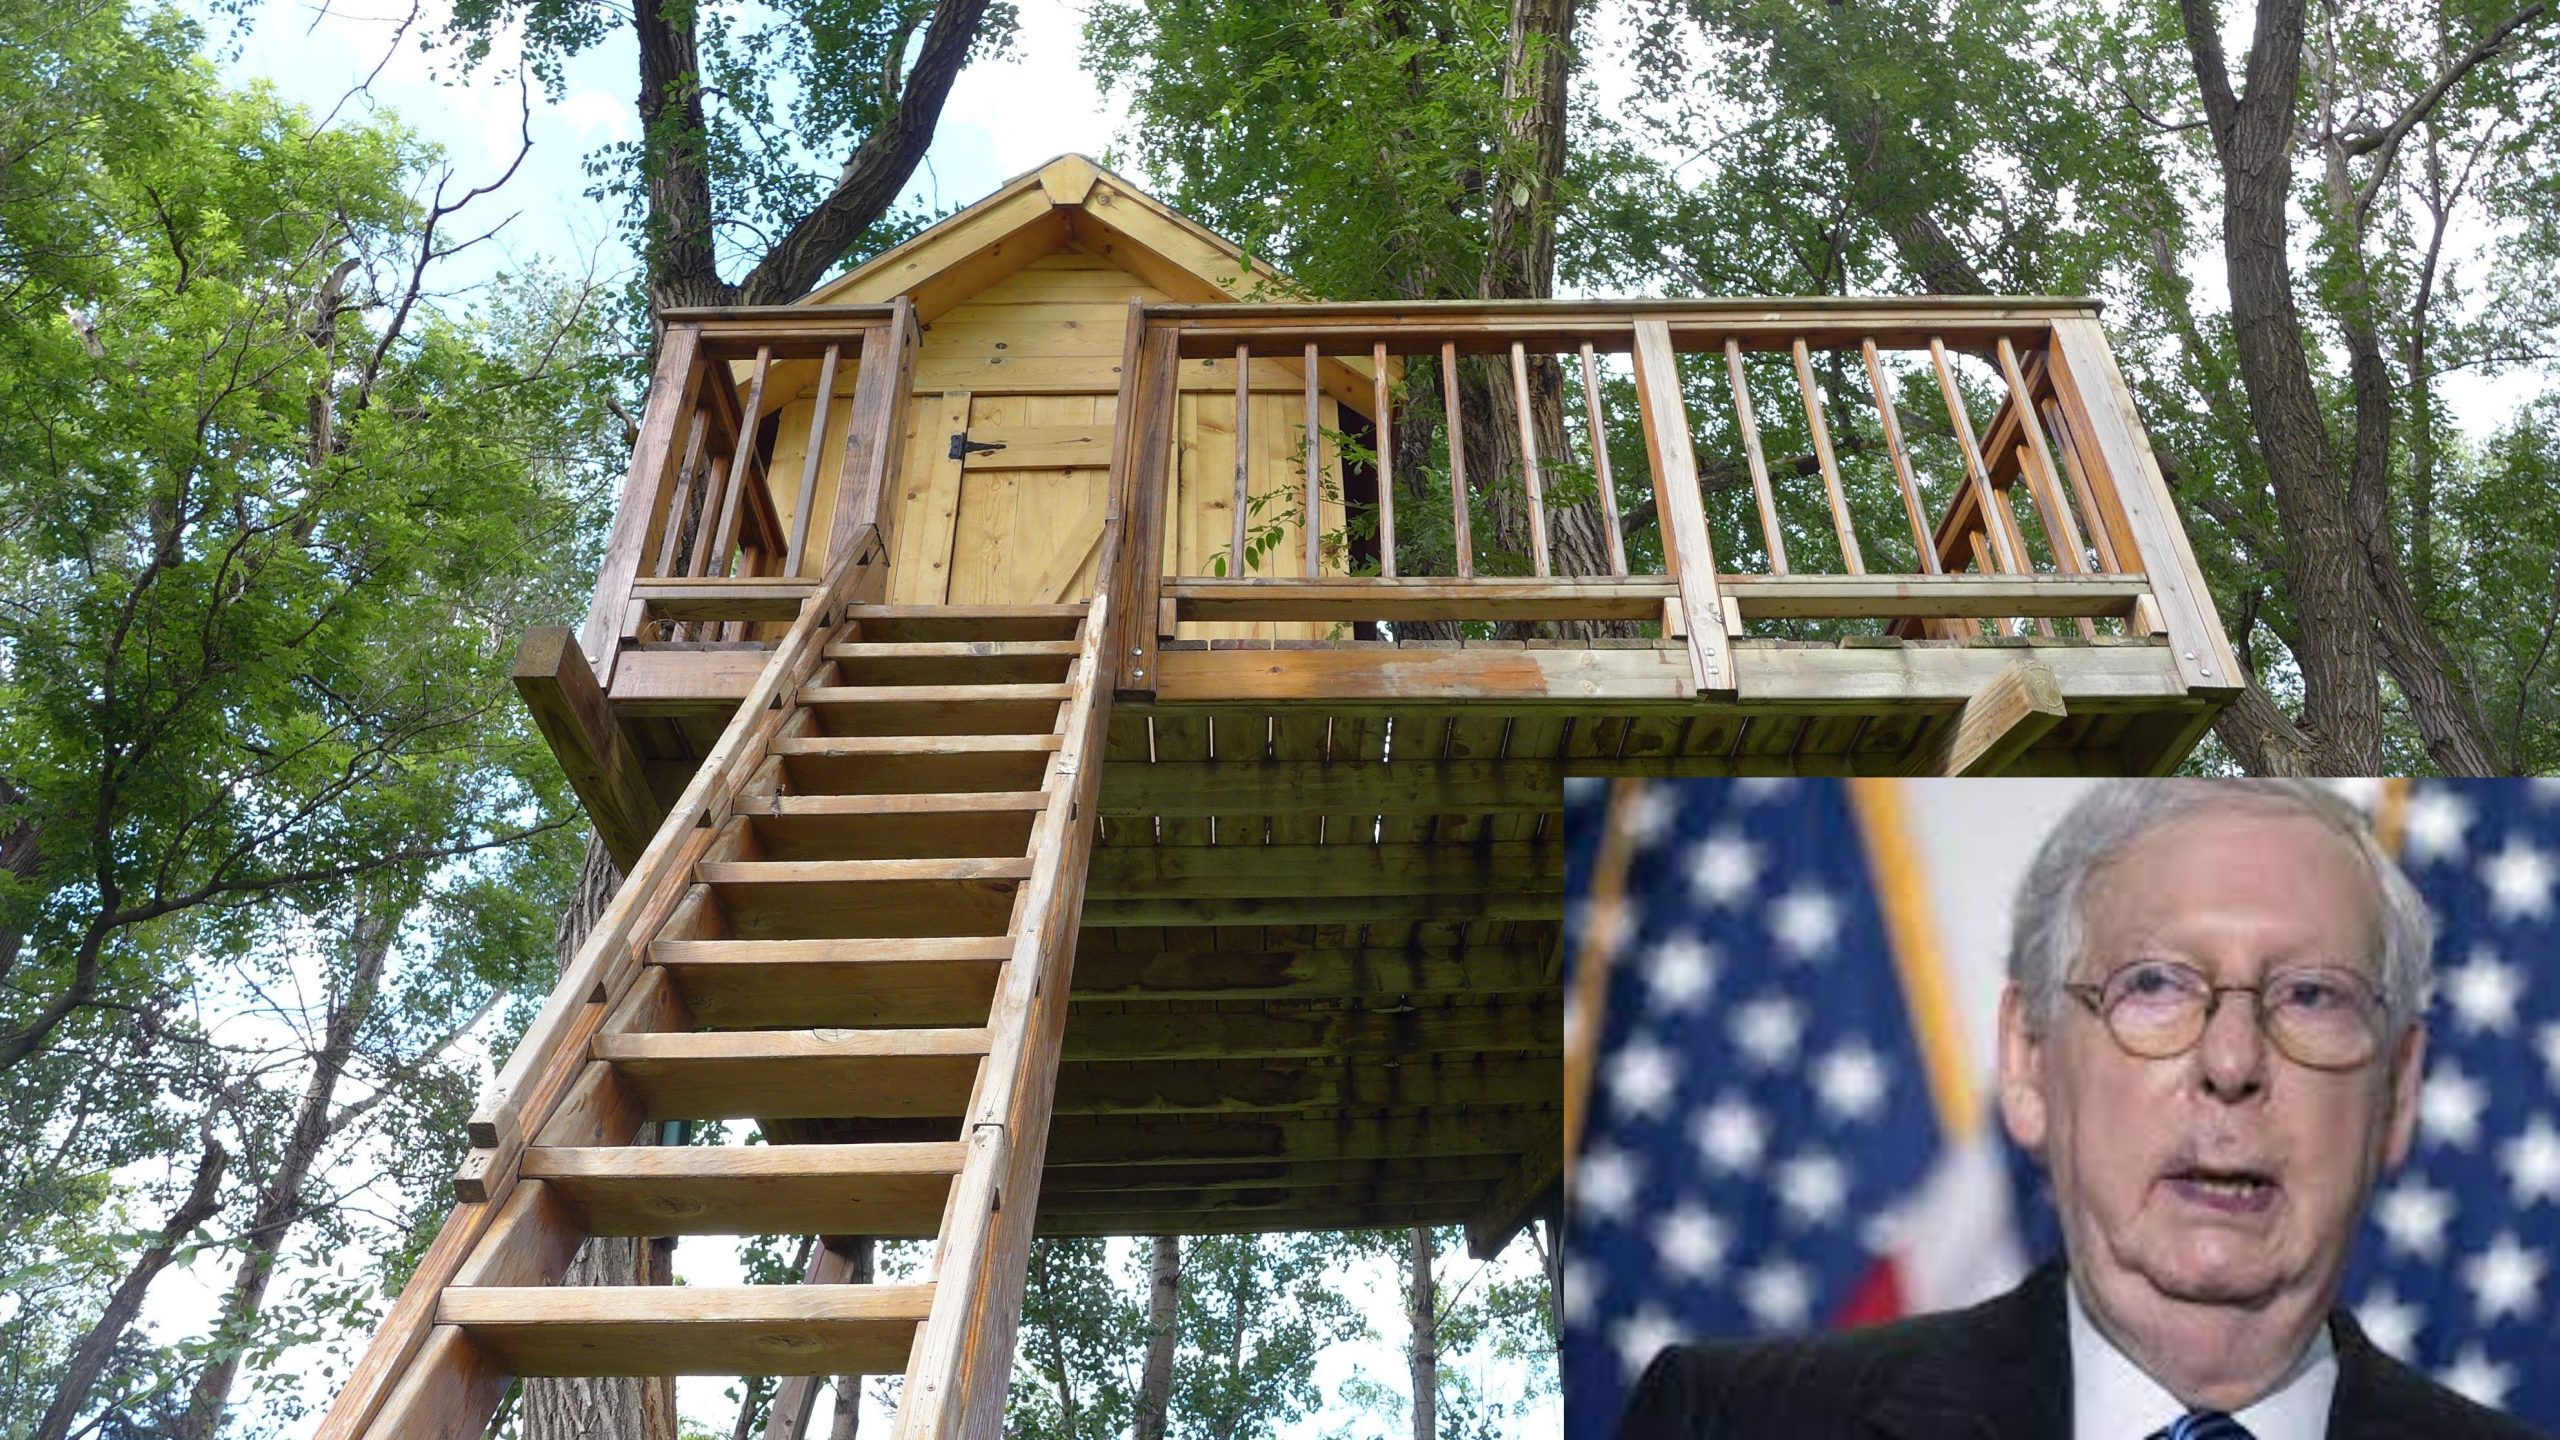 A photo of Mitch McConnell next to a photo of a treehouse.